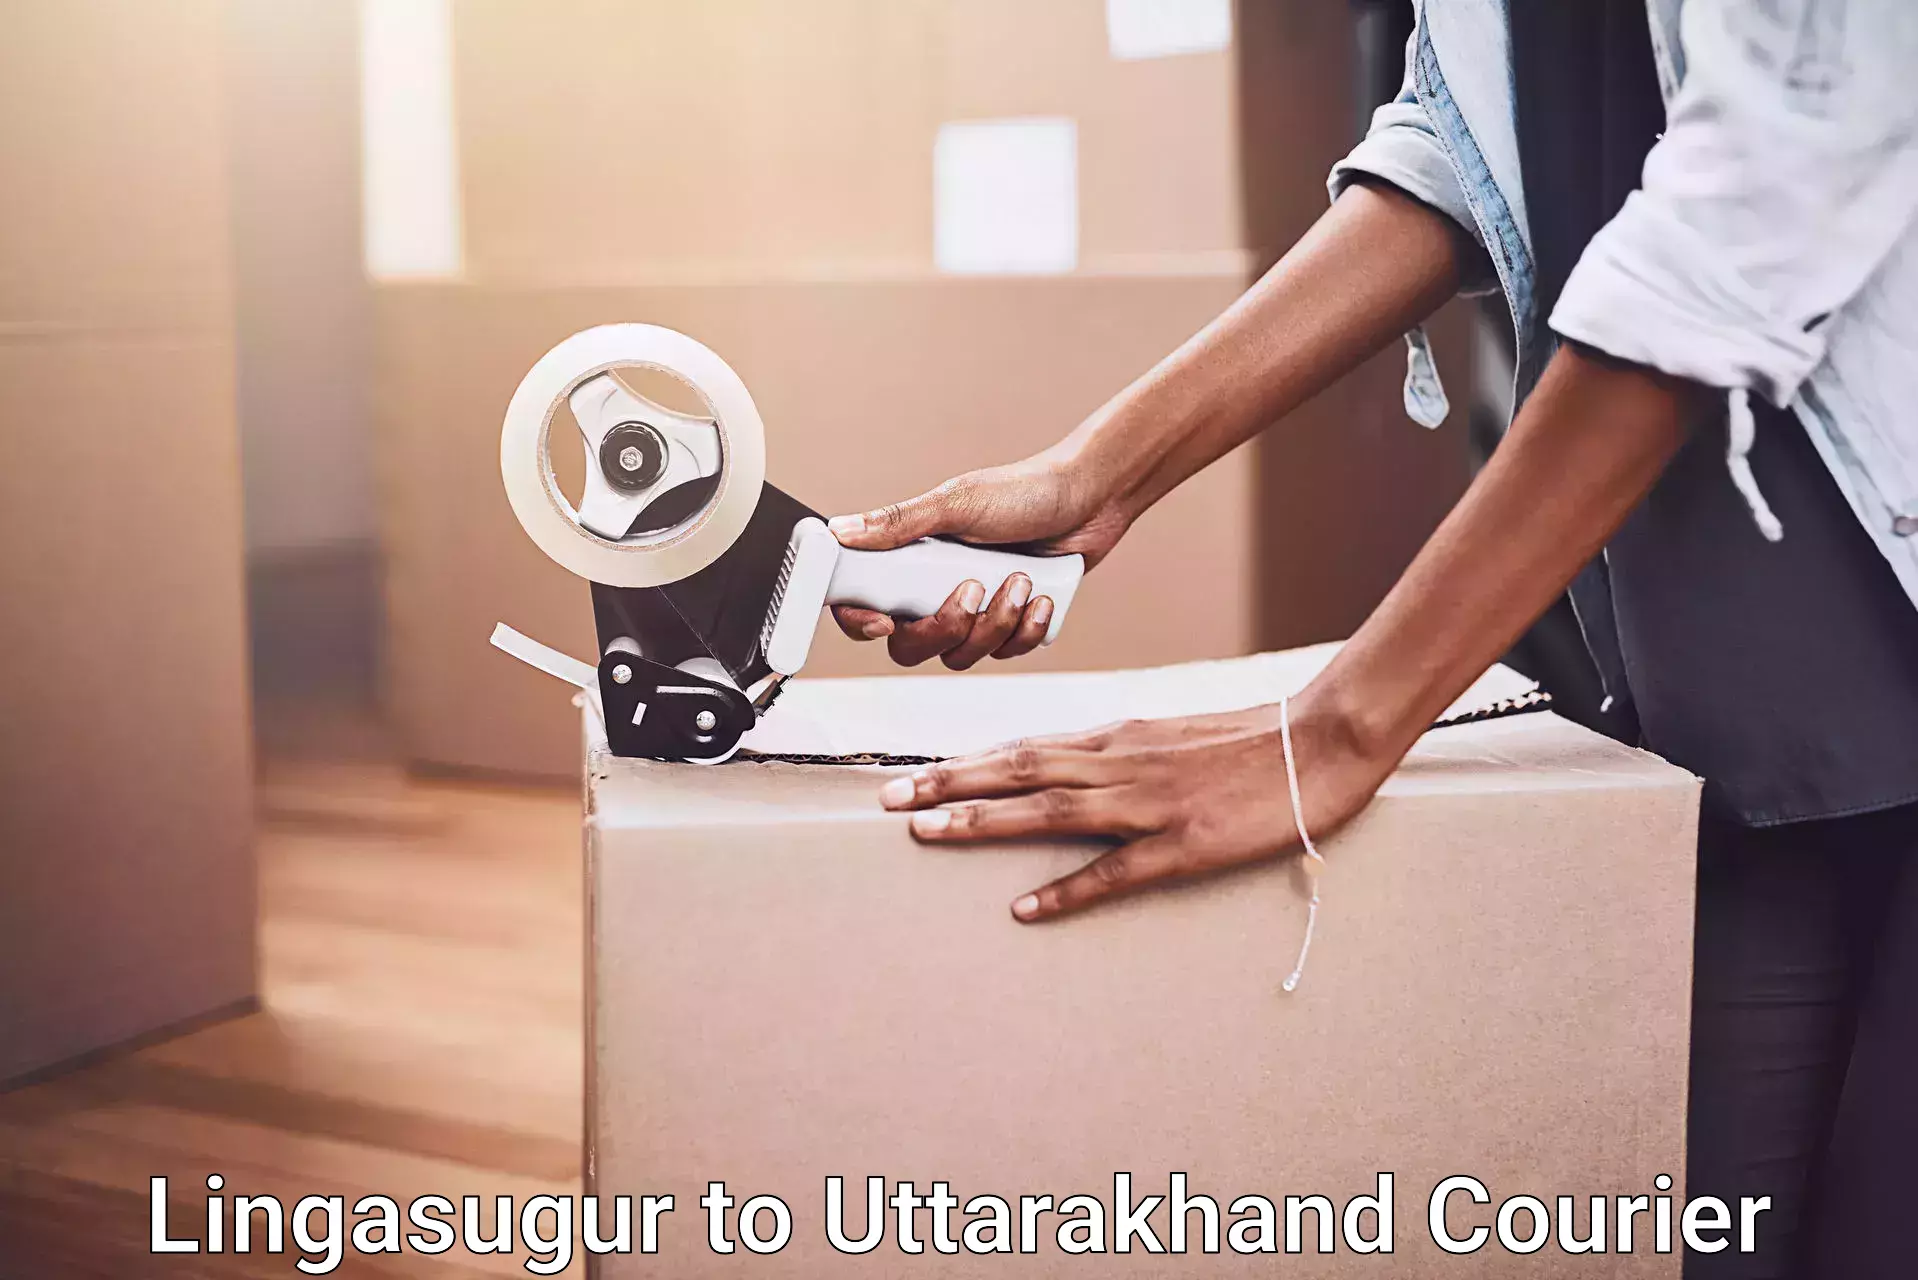 Home relocation experts Lingasugur to Bhagwanpur